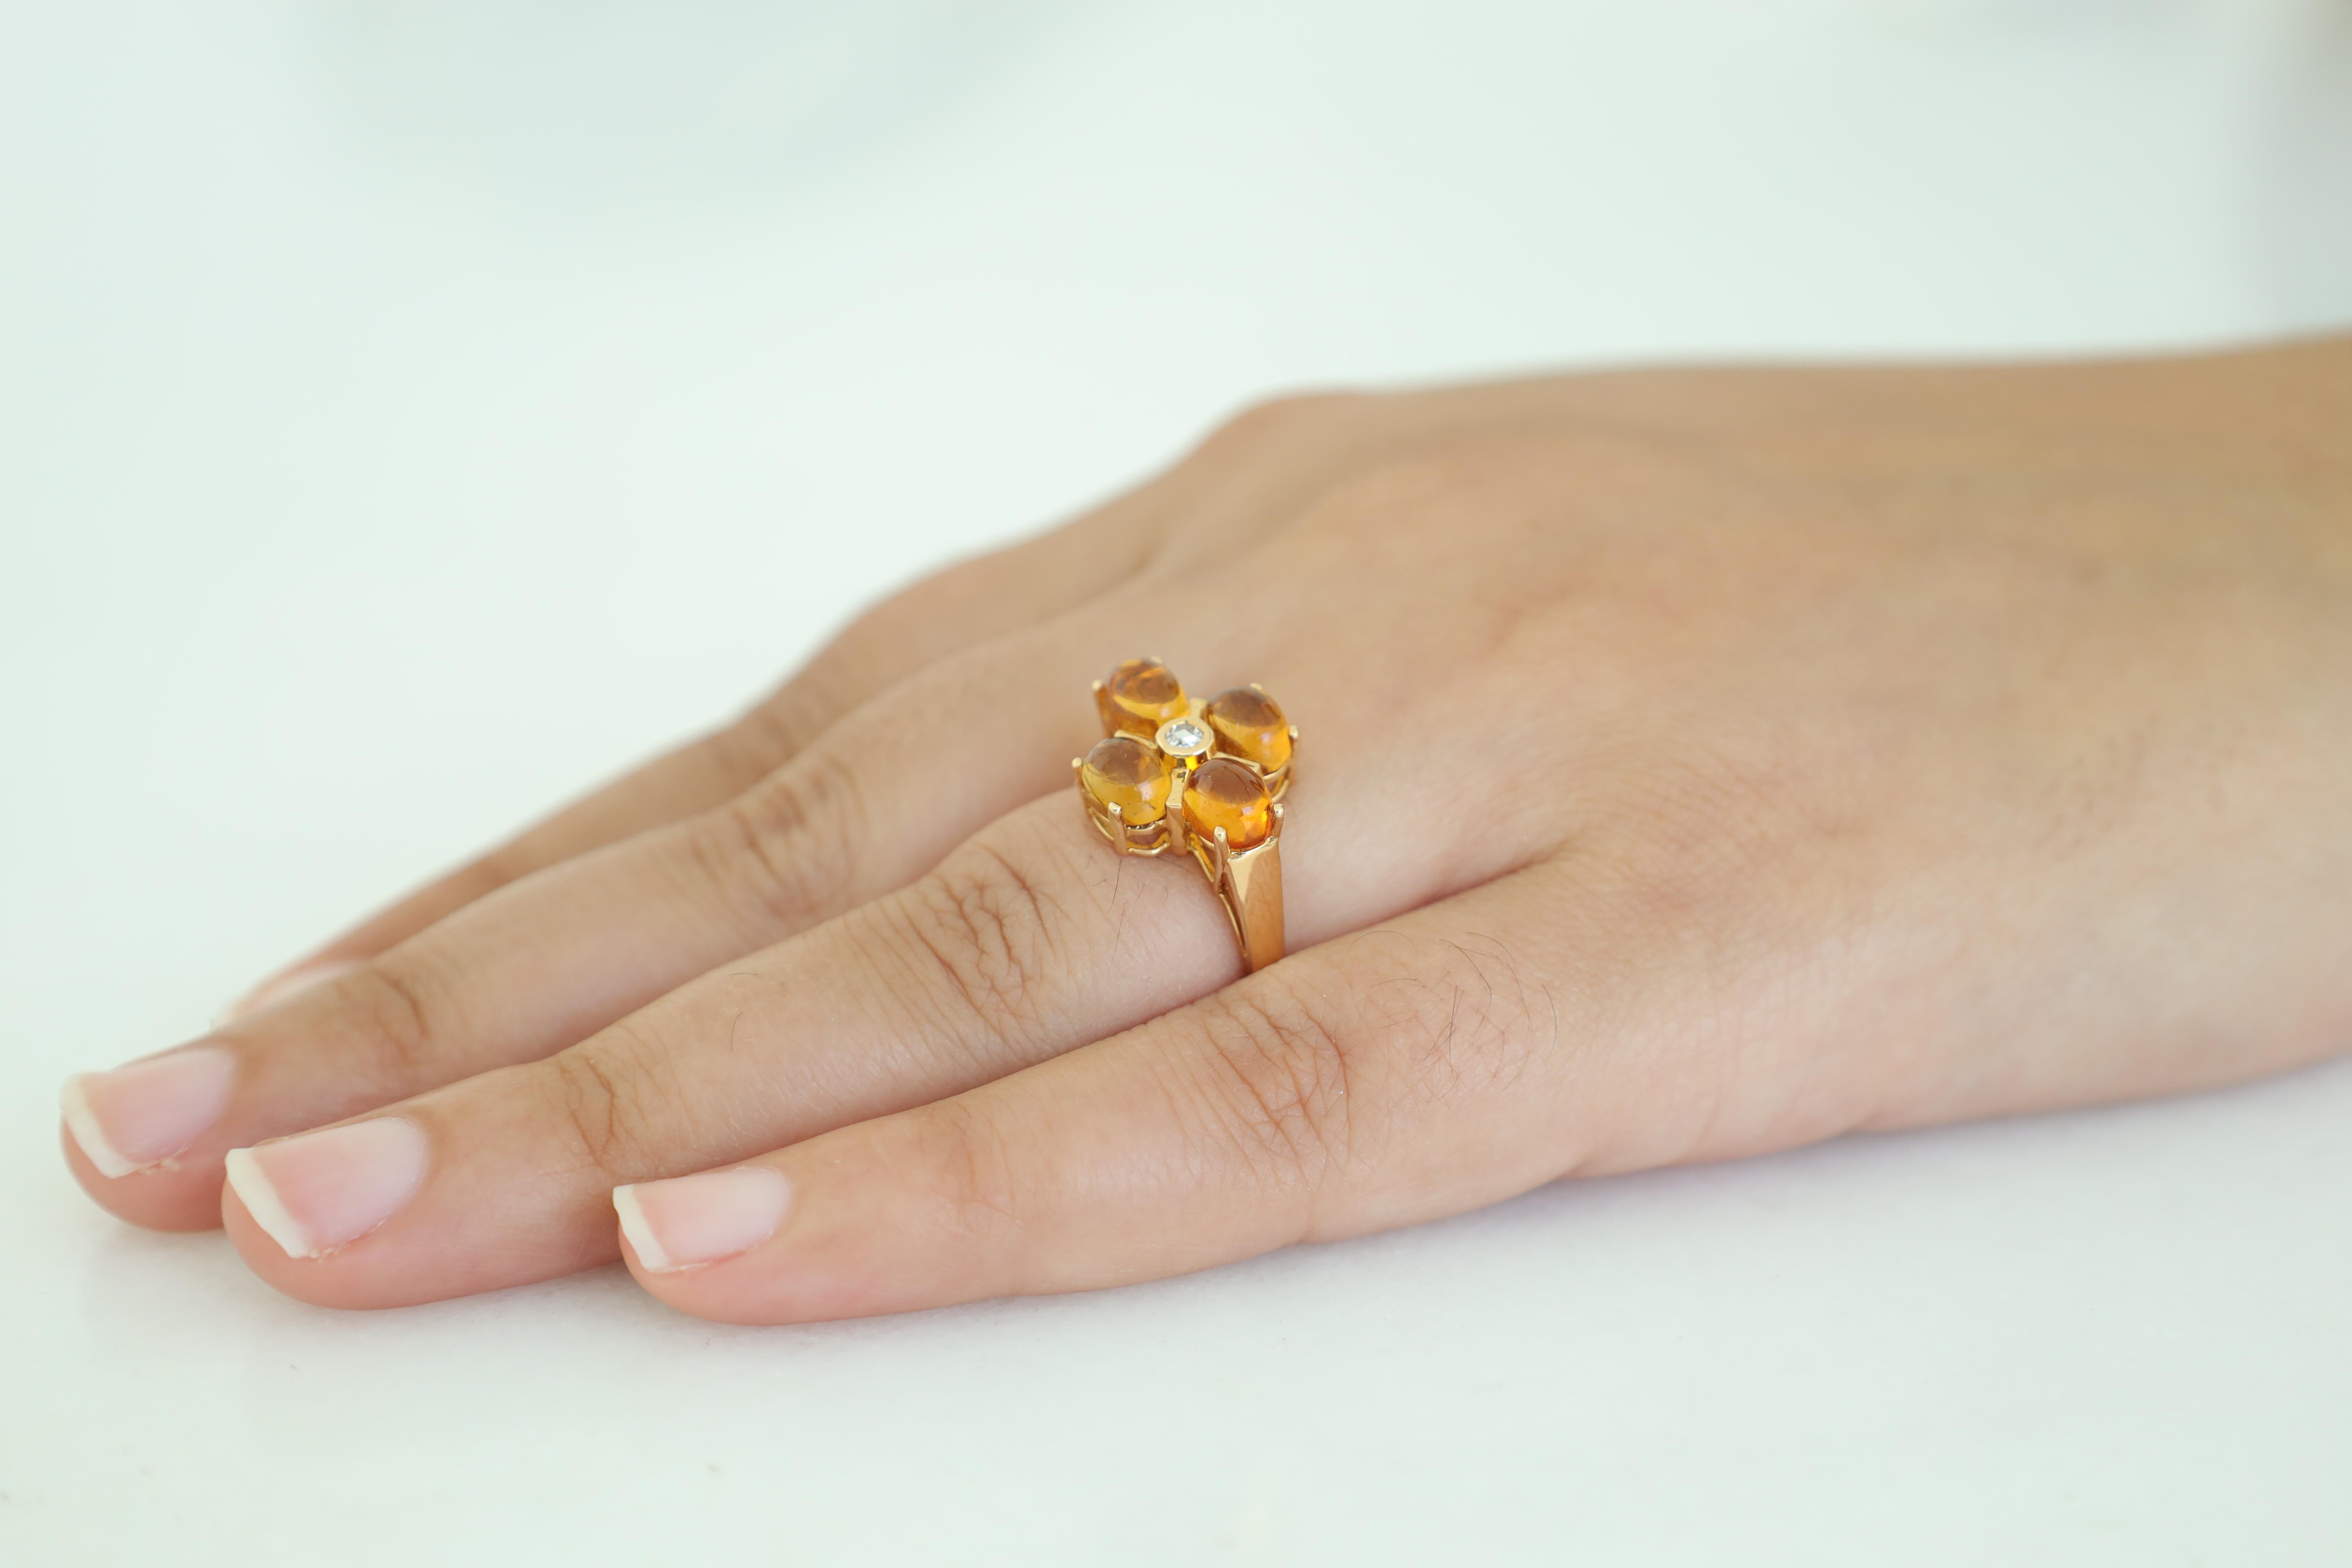 4.01 Carat Clear Citrine & Diamond Ring in 18k Gold In New Condition For Sale In Jaipur, Rajasthan